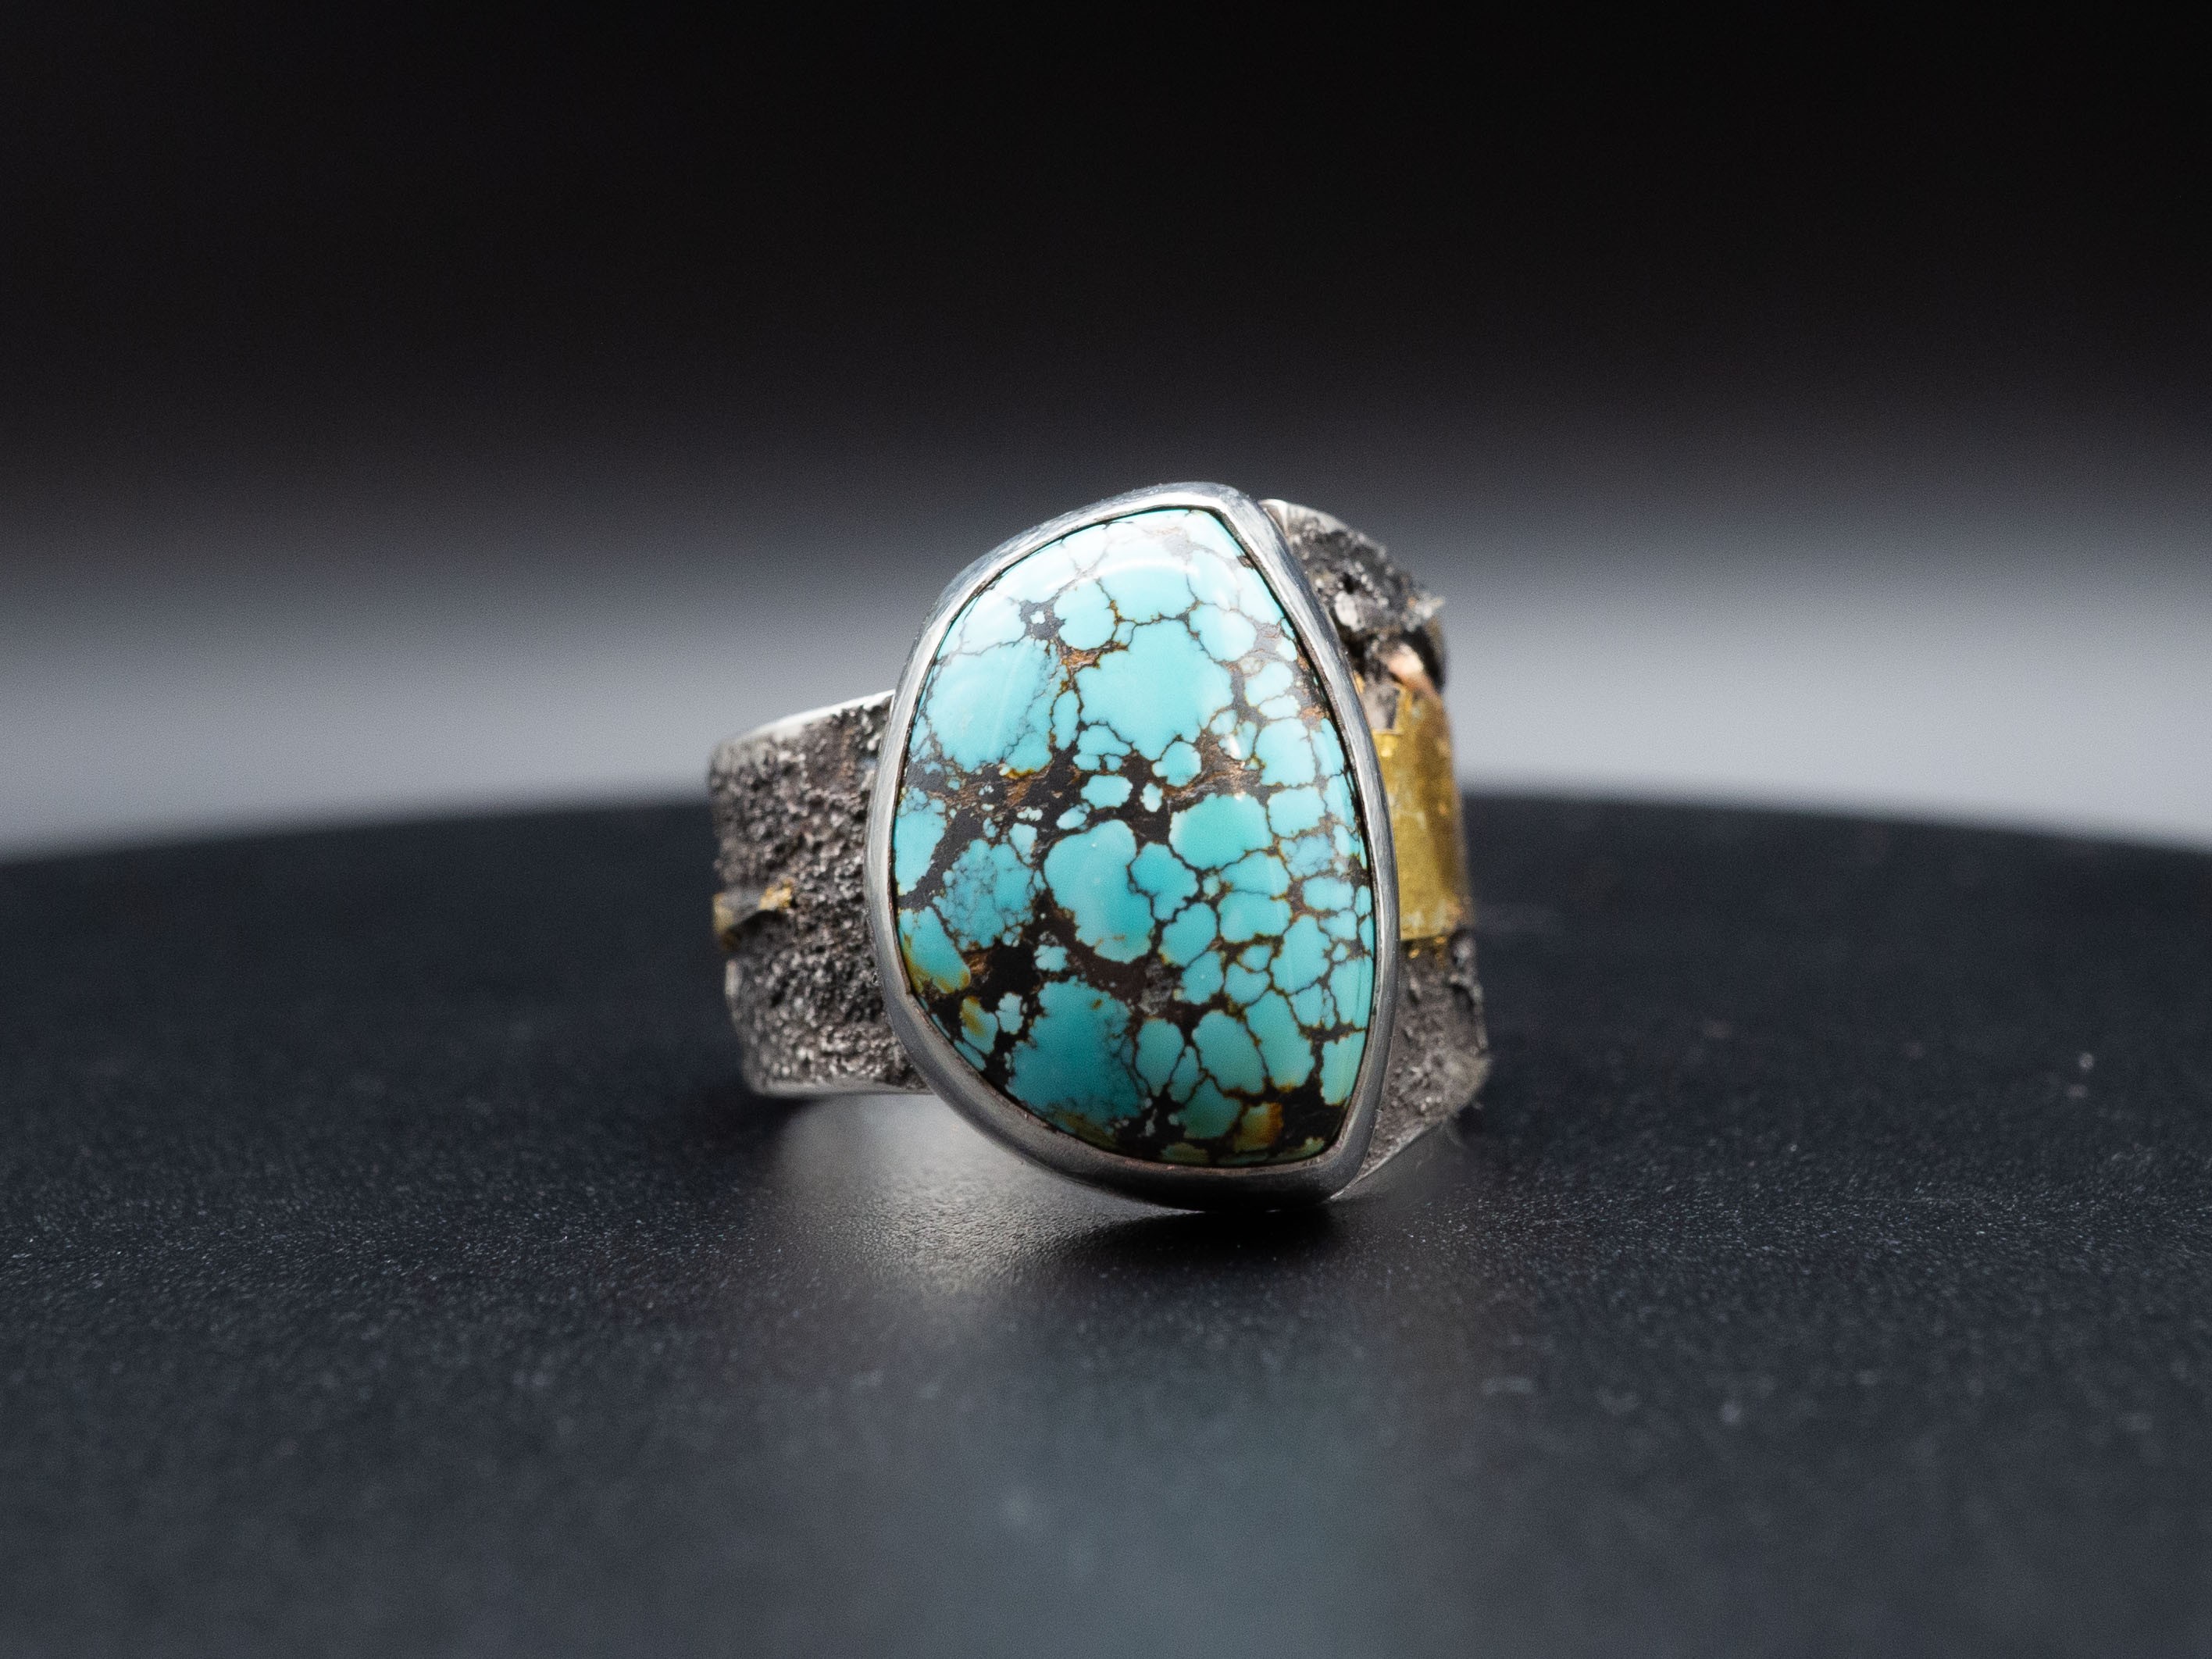 Turquoise Textured Ring with Keum Boo Accents